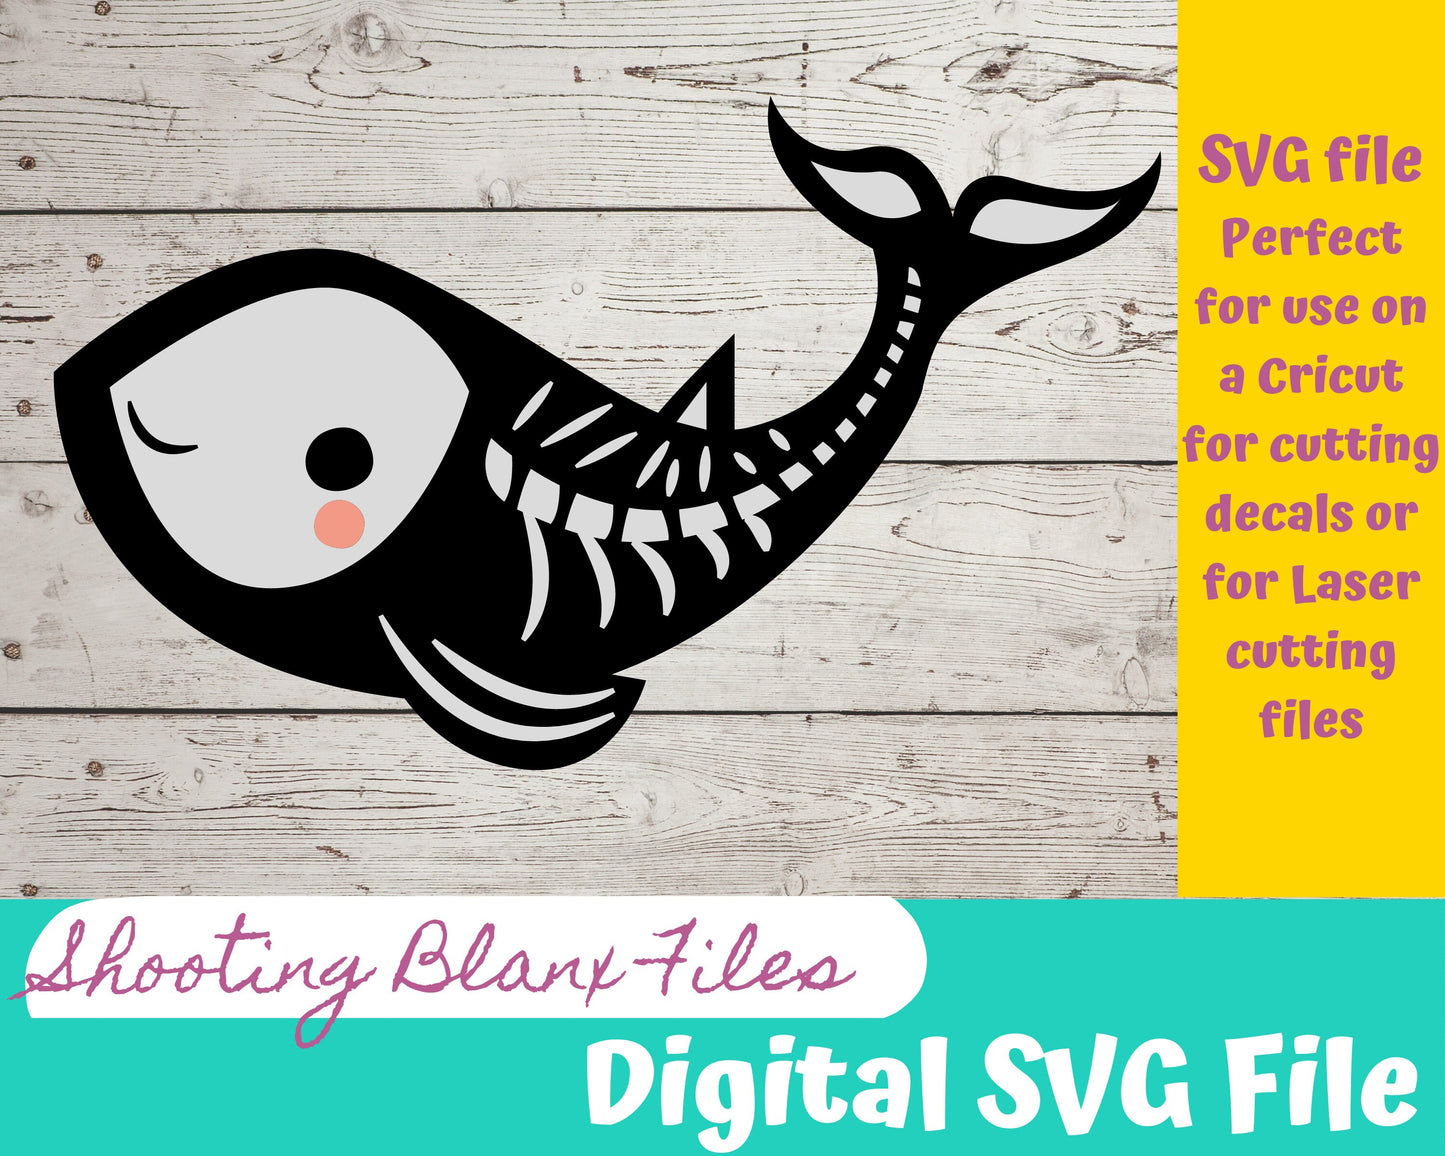 Animal Skeleton 22 SVG Bundle file perfect for Cricut, Cameo, or Silhouette also for laser engraving Glowforge, Scary, Halloween, animal